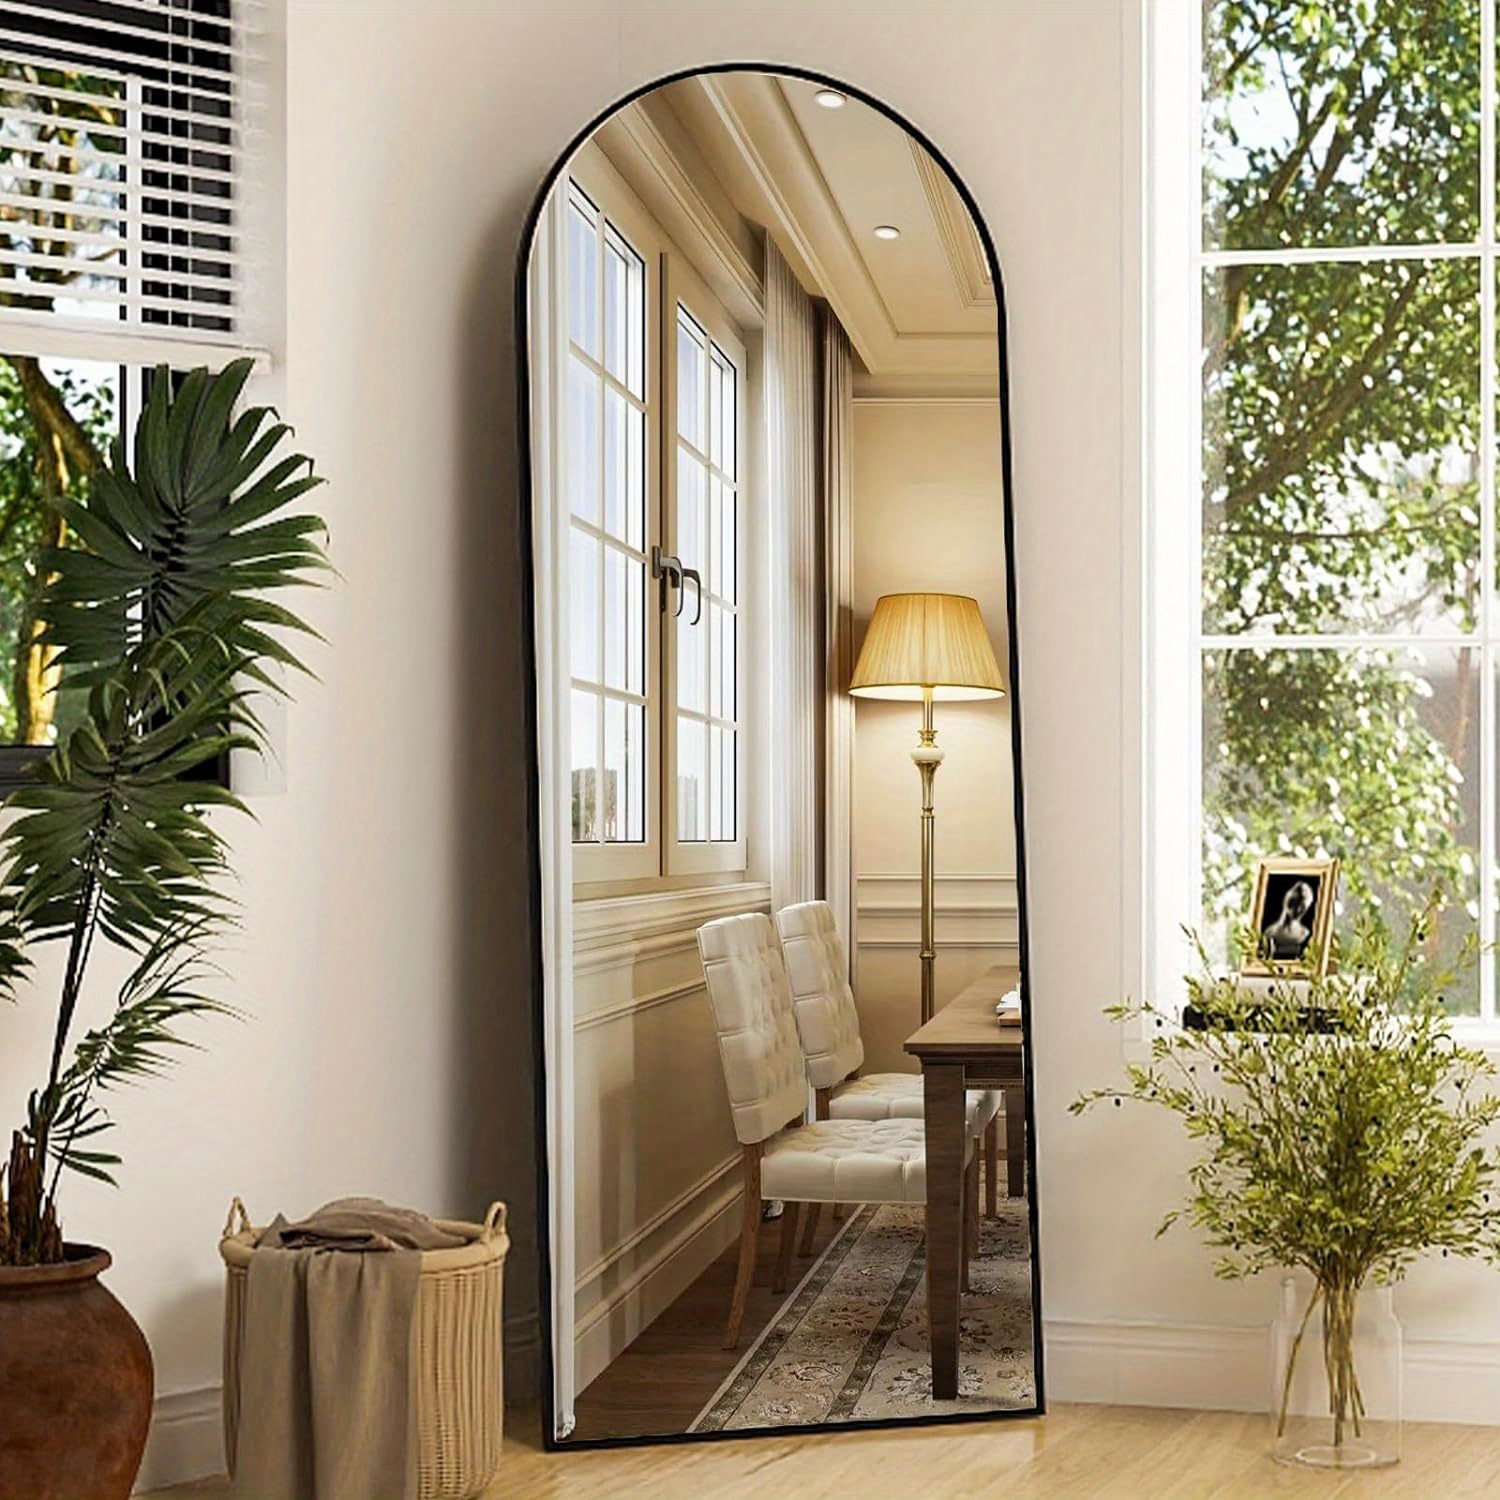 

Arched Full Length Mirror, 64" X 21" Arch Floor Mirror With Stand, Full Length Mirror Wall Mirror Hanging Or Leaning Arched-top Full Body Mirror With Stand For Bedroom, Dressing Room